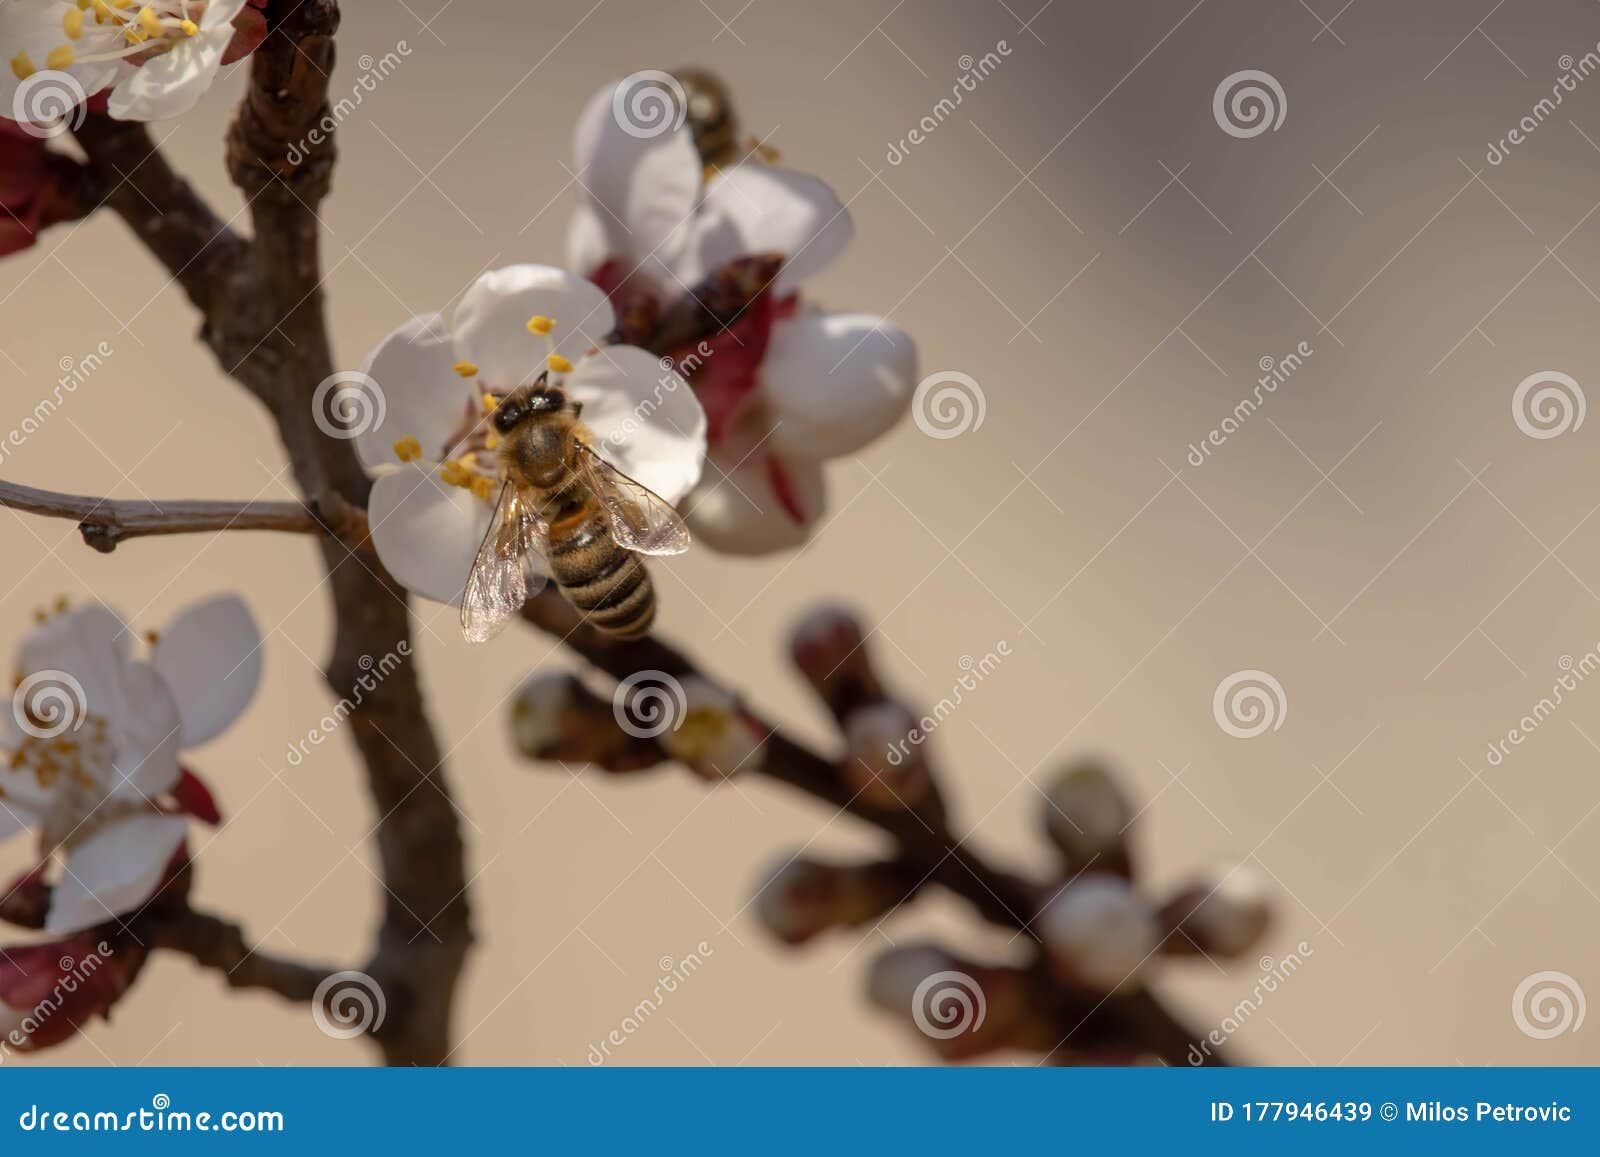 bees pollinate apricot tree in early march bee on flower buds in early winter